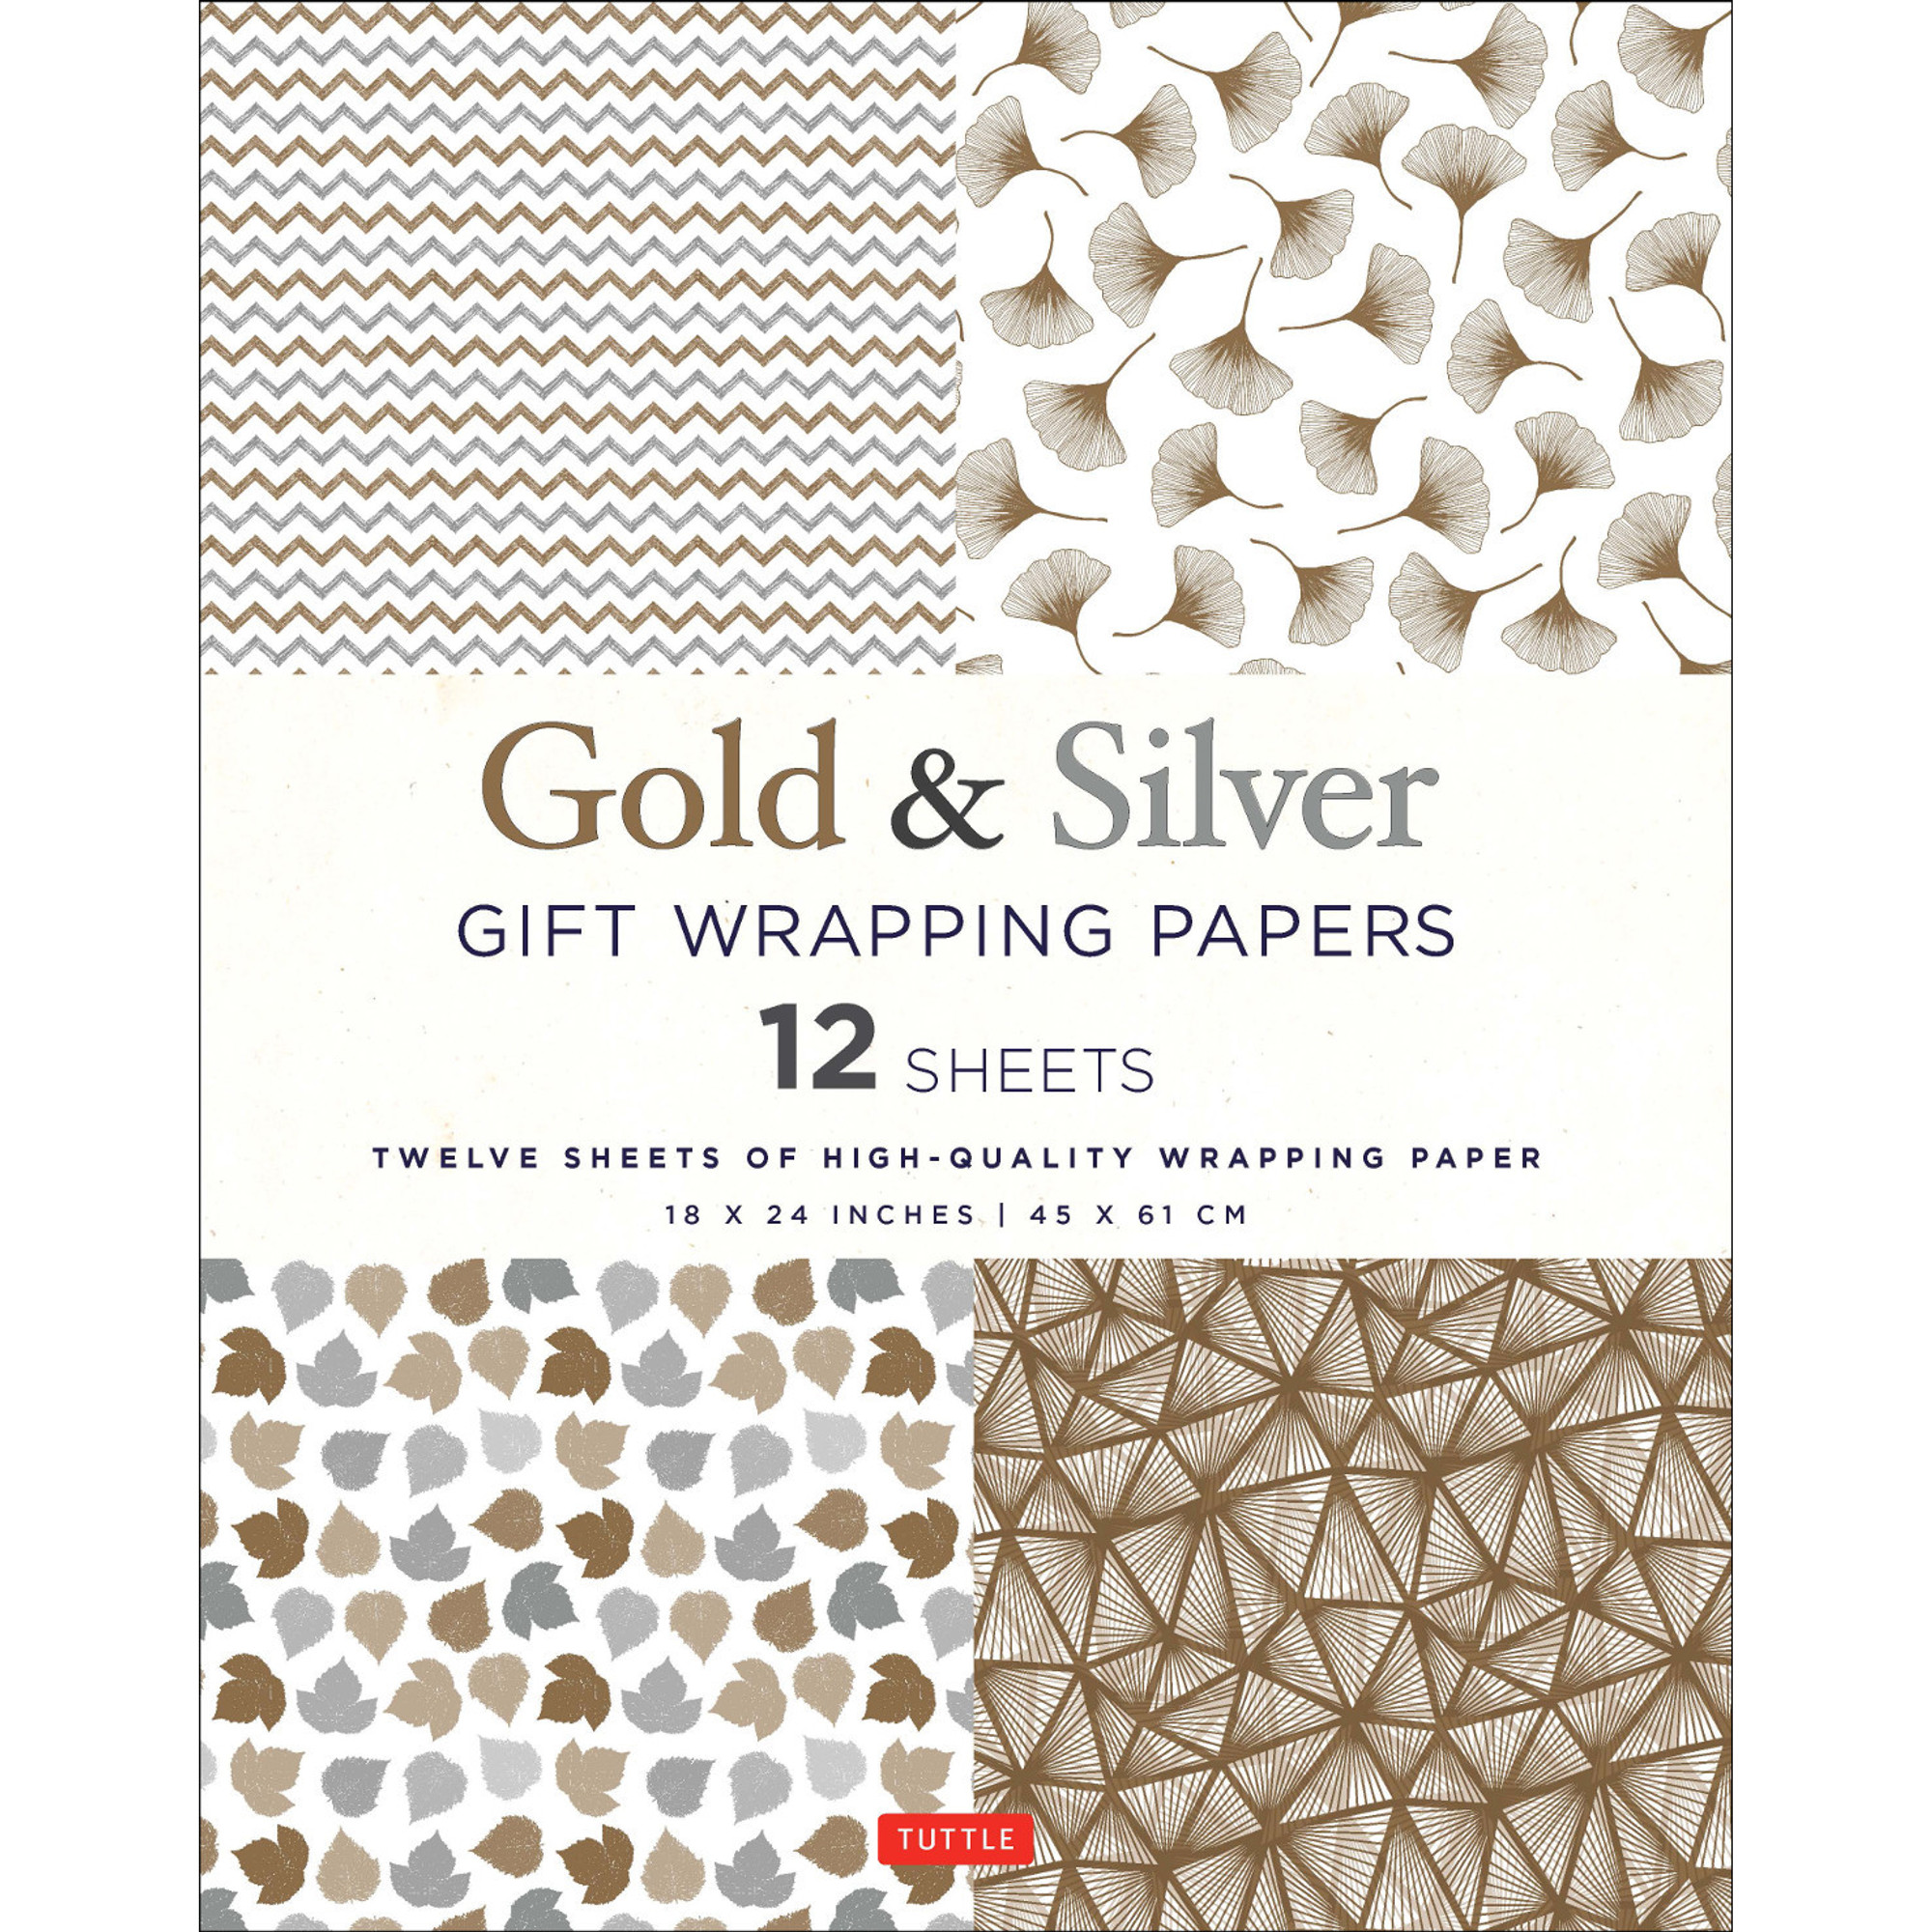 Gold and Silver Sheen paper – Hiromi Paper, Inc.